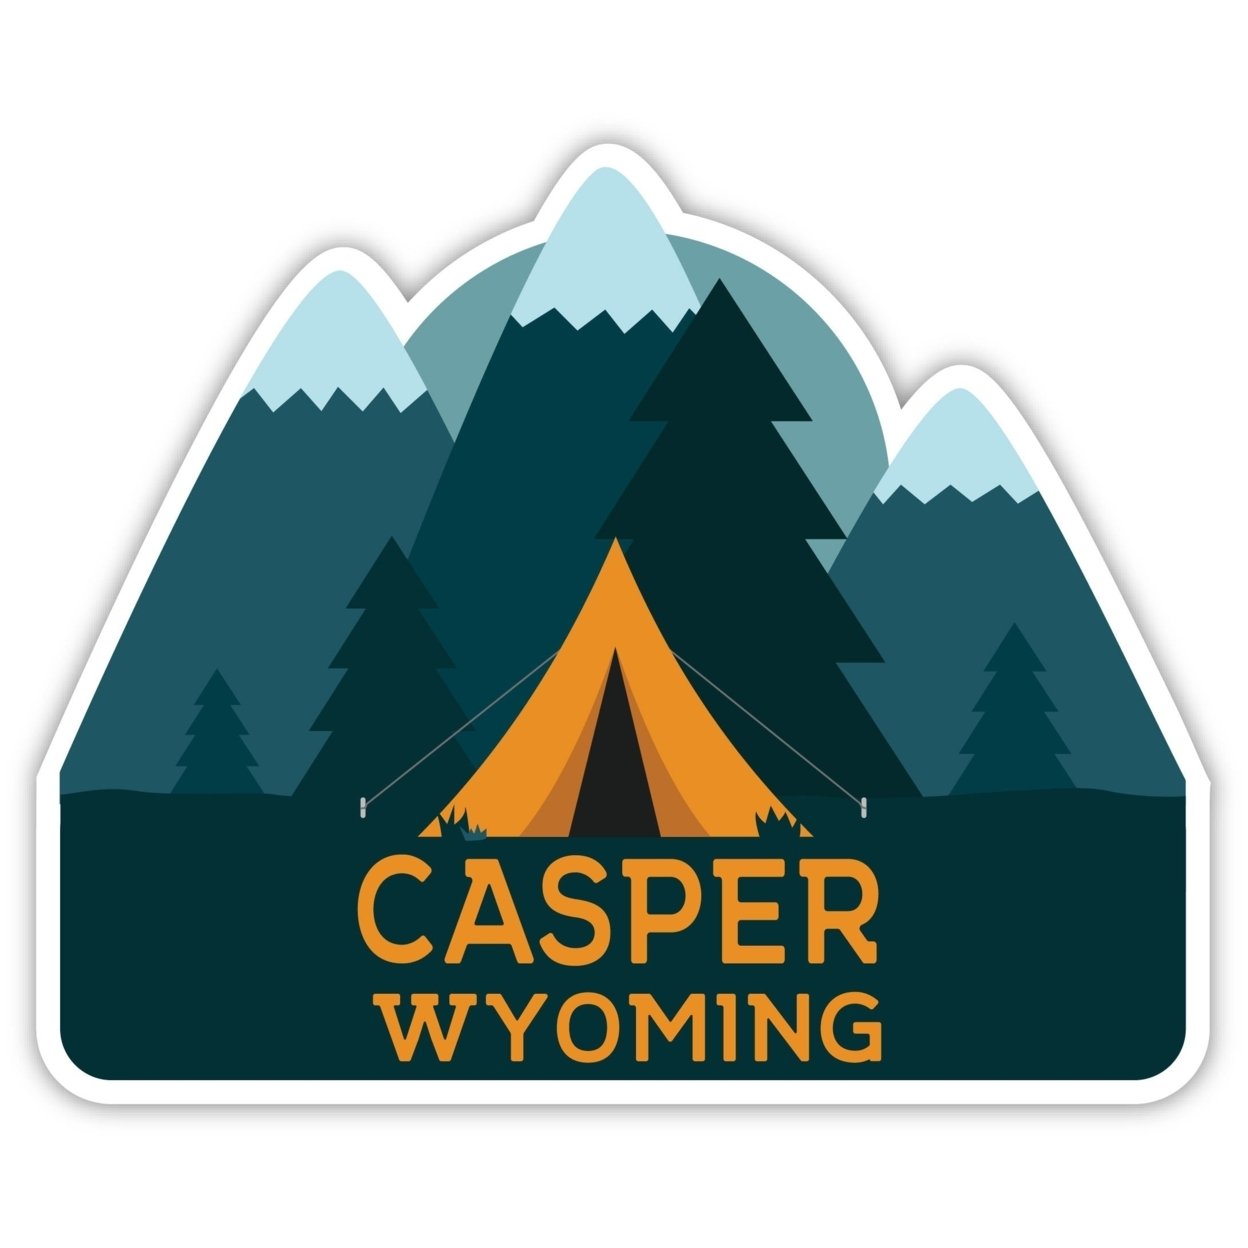 Casper Wyoming Souvenir Decorative Stickers (Choose Theme And Size) - Single Unit, 10-Inch, Great Outdoors